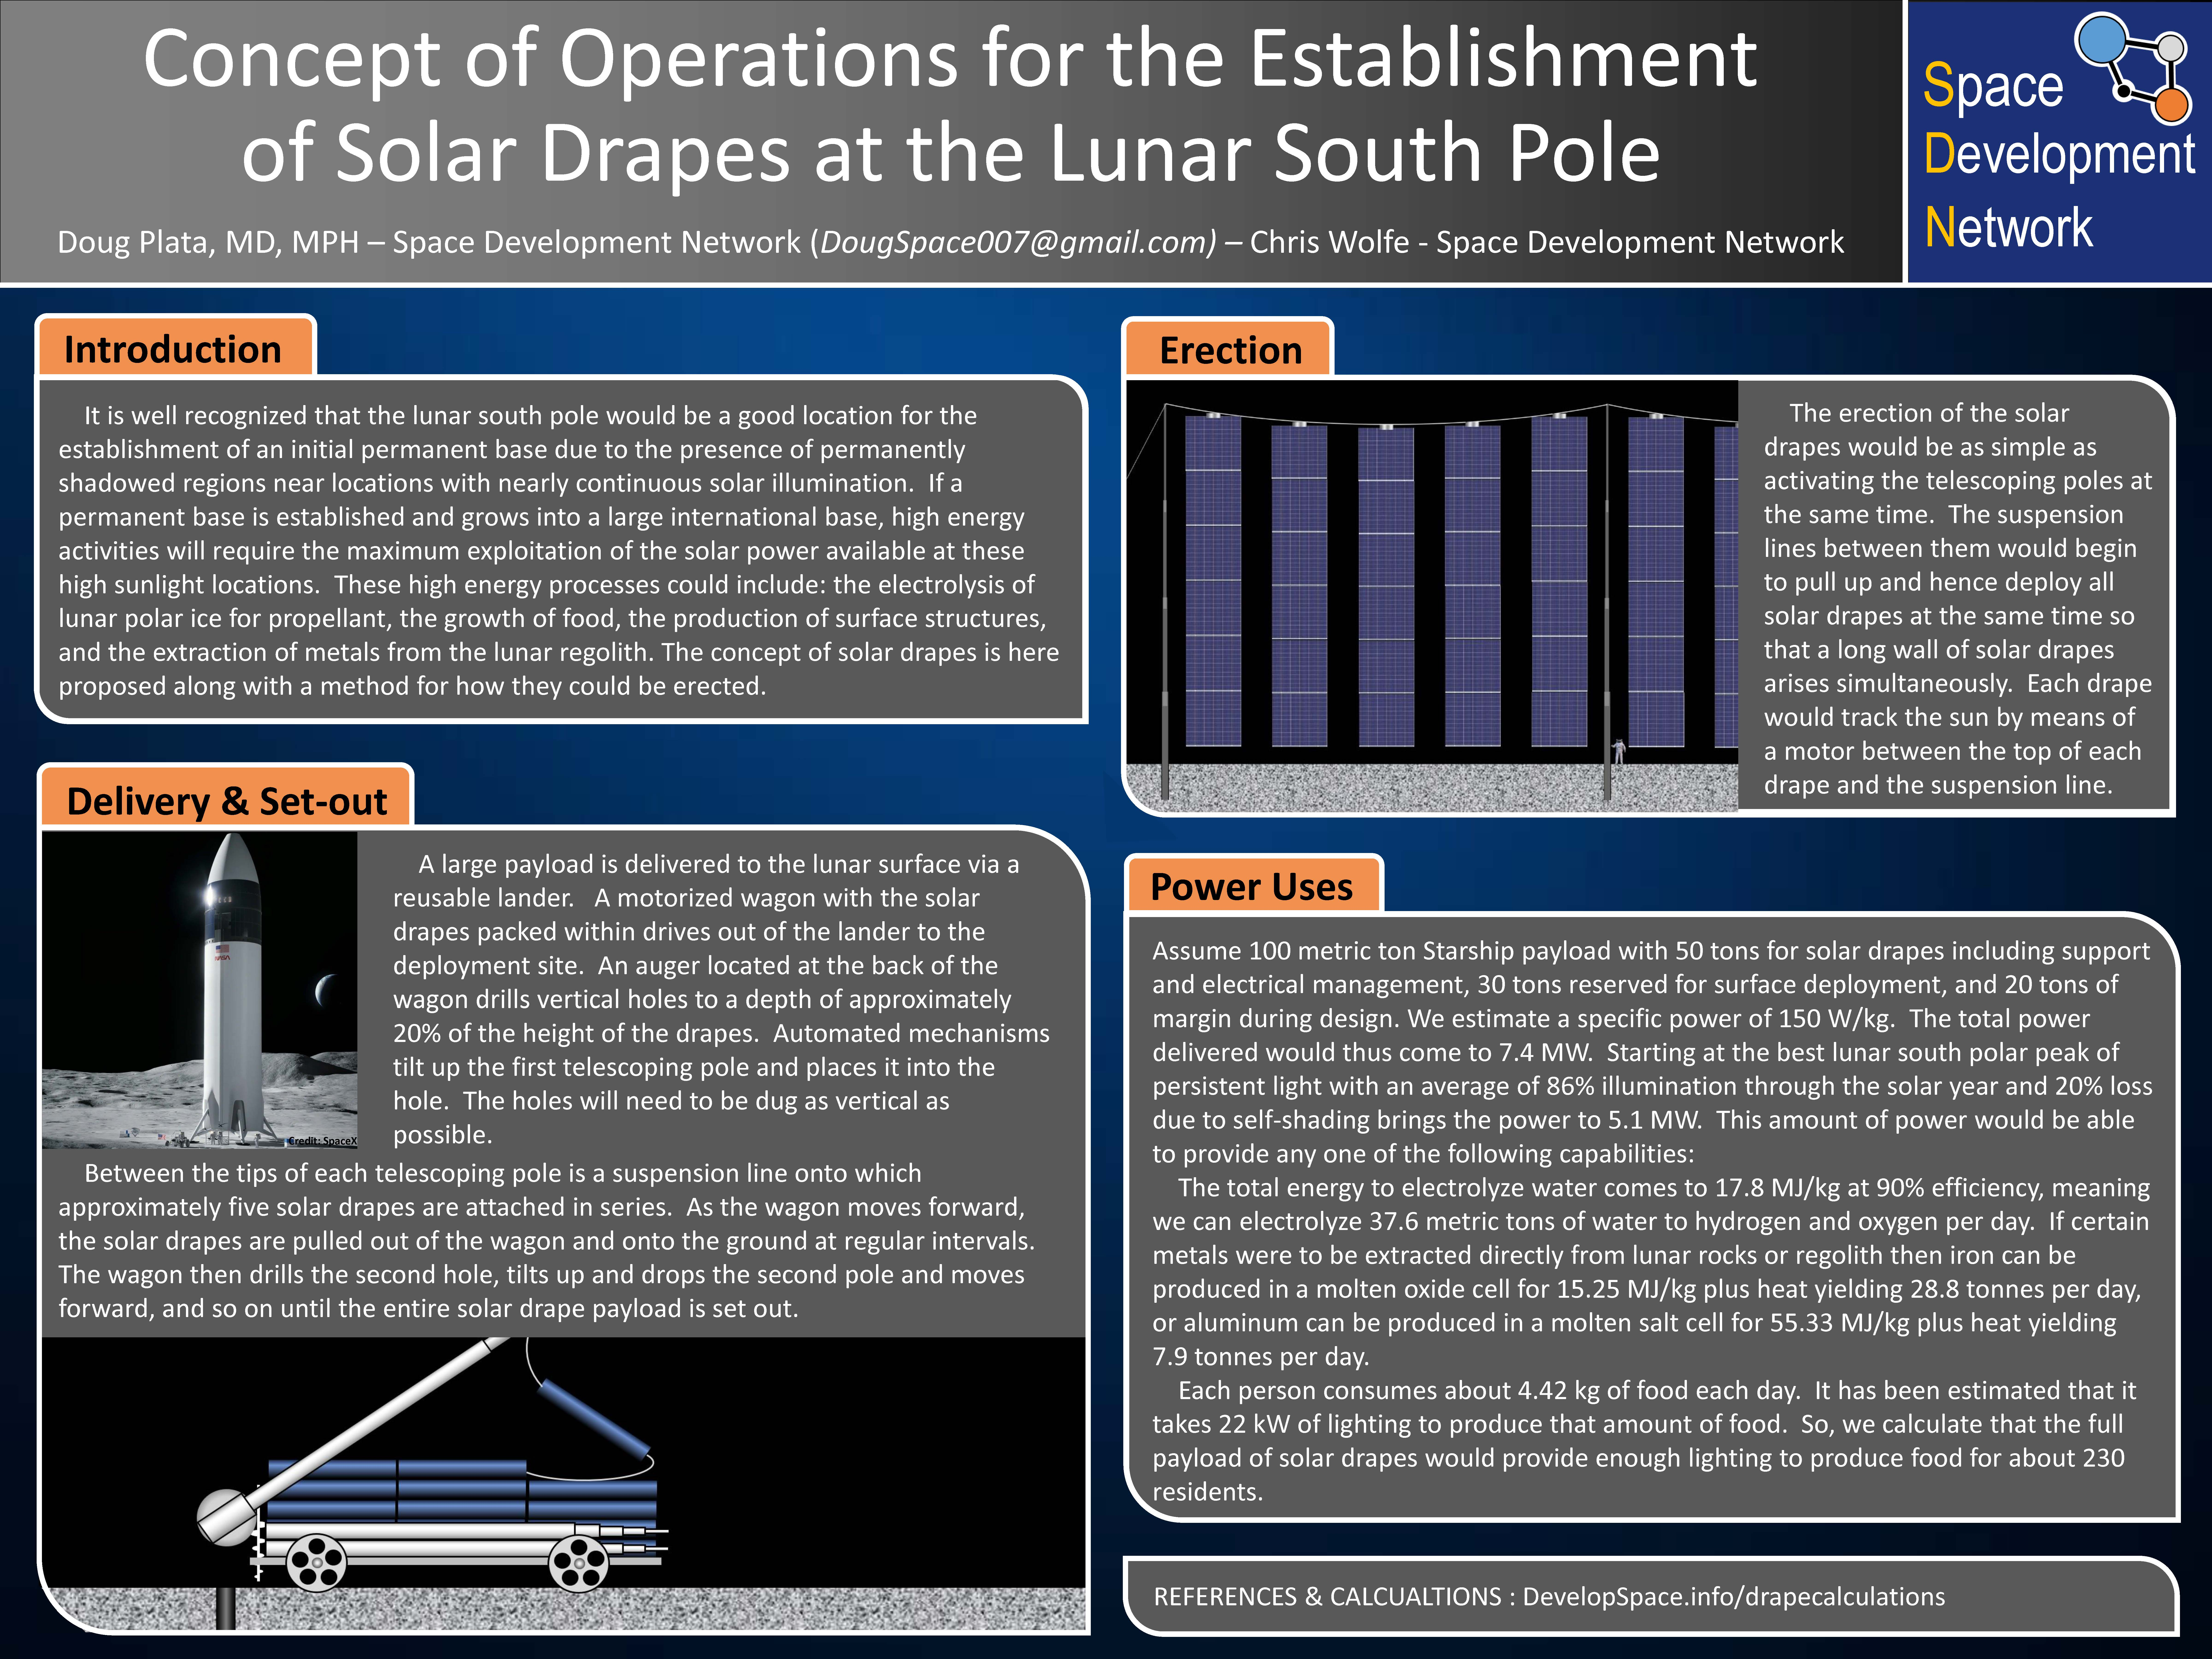 Concept of Operations for the Establishment of Solar Drapes at the Lunar South Pole